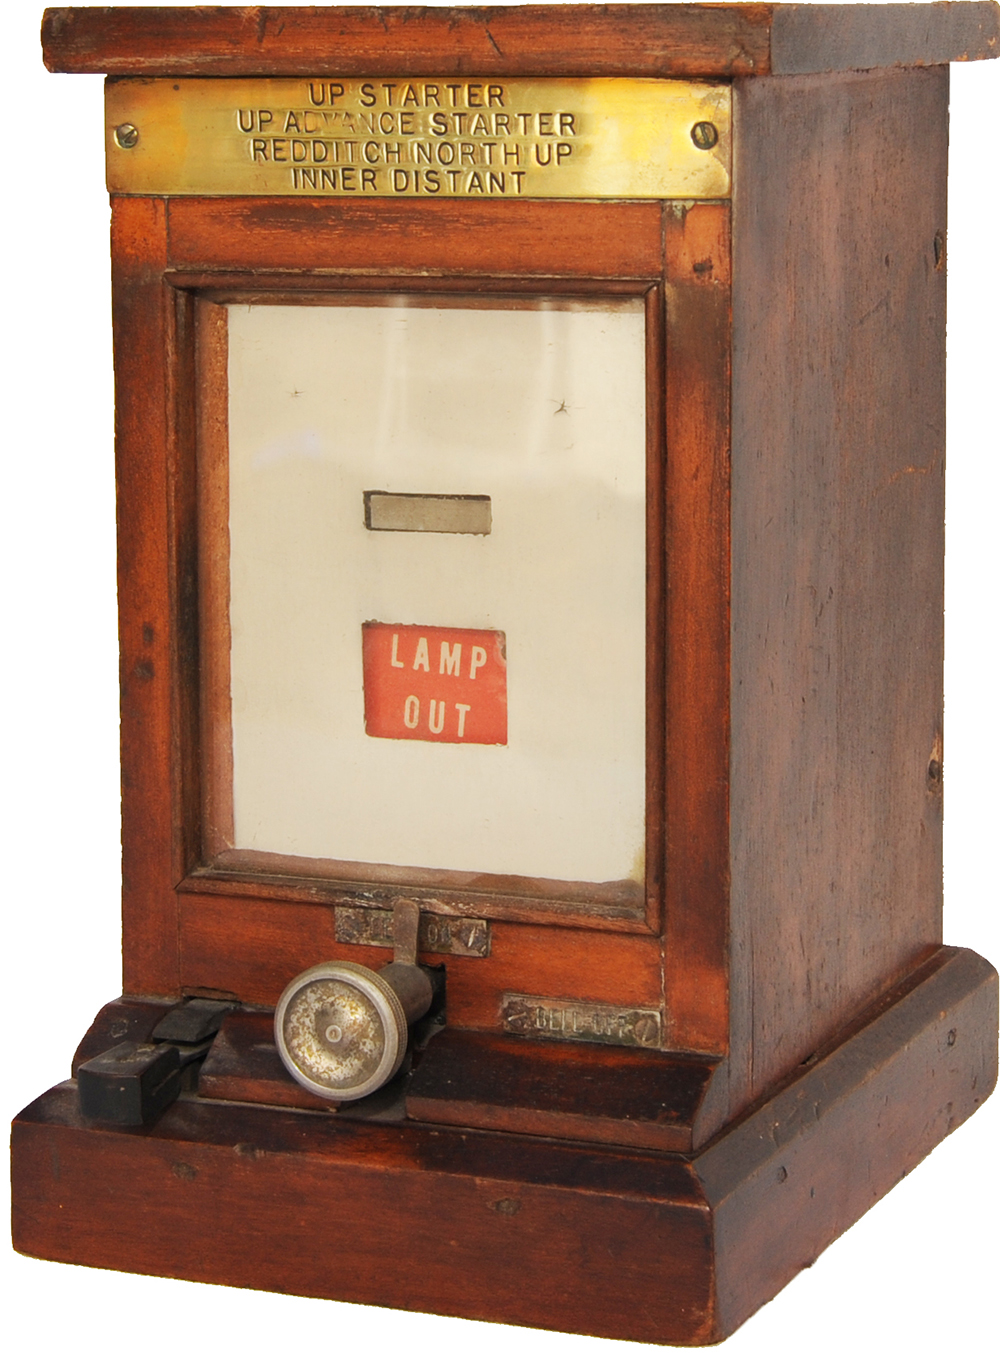 GWR Mahogany cased lamp repeater with flag Lamp out Lamp In, Brass plate on top UP STARTER UP